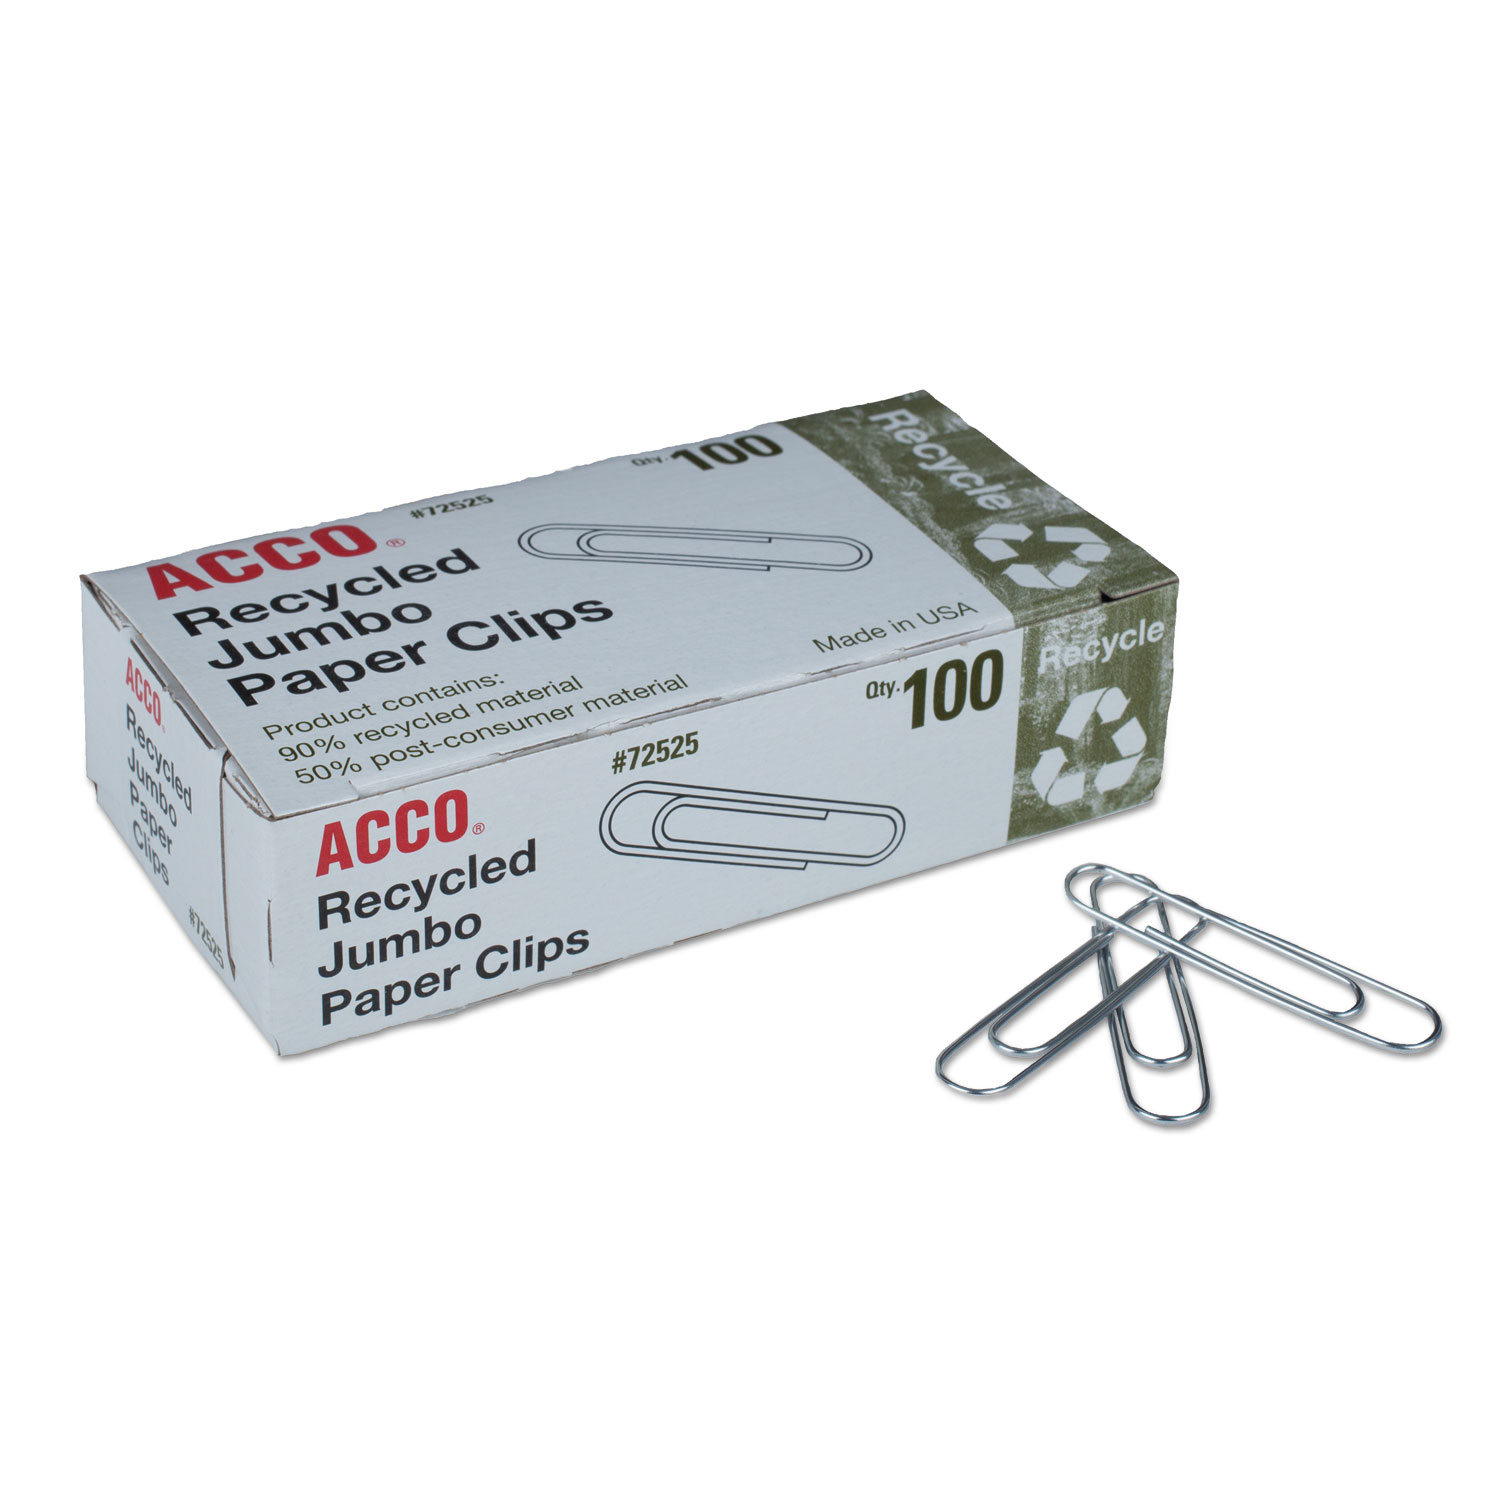  ACCO A7072525A Paper Clips, Jumbo, Silver, 1,000/Pack (ACC72525) 